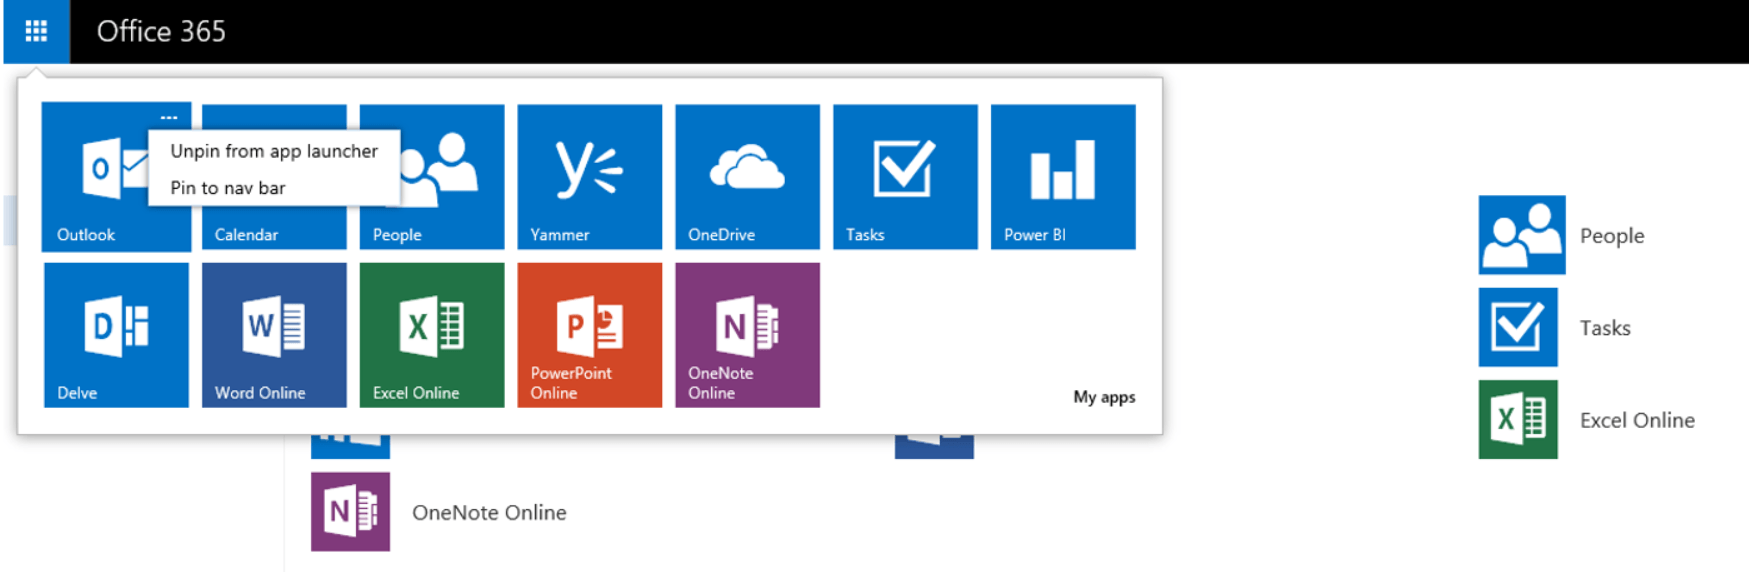 Microsoft Office 365 App Logo - Organize your Office 365 with the new app launcher - Microsoft 365 Blog